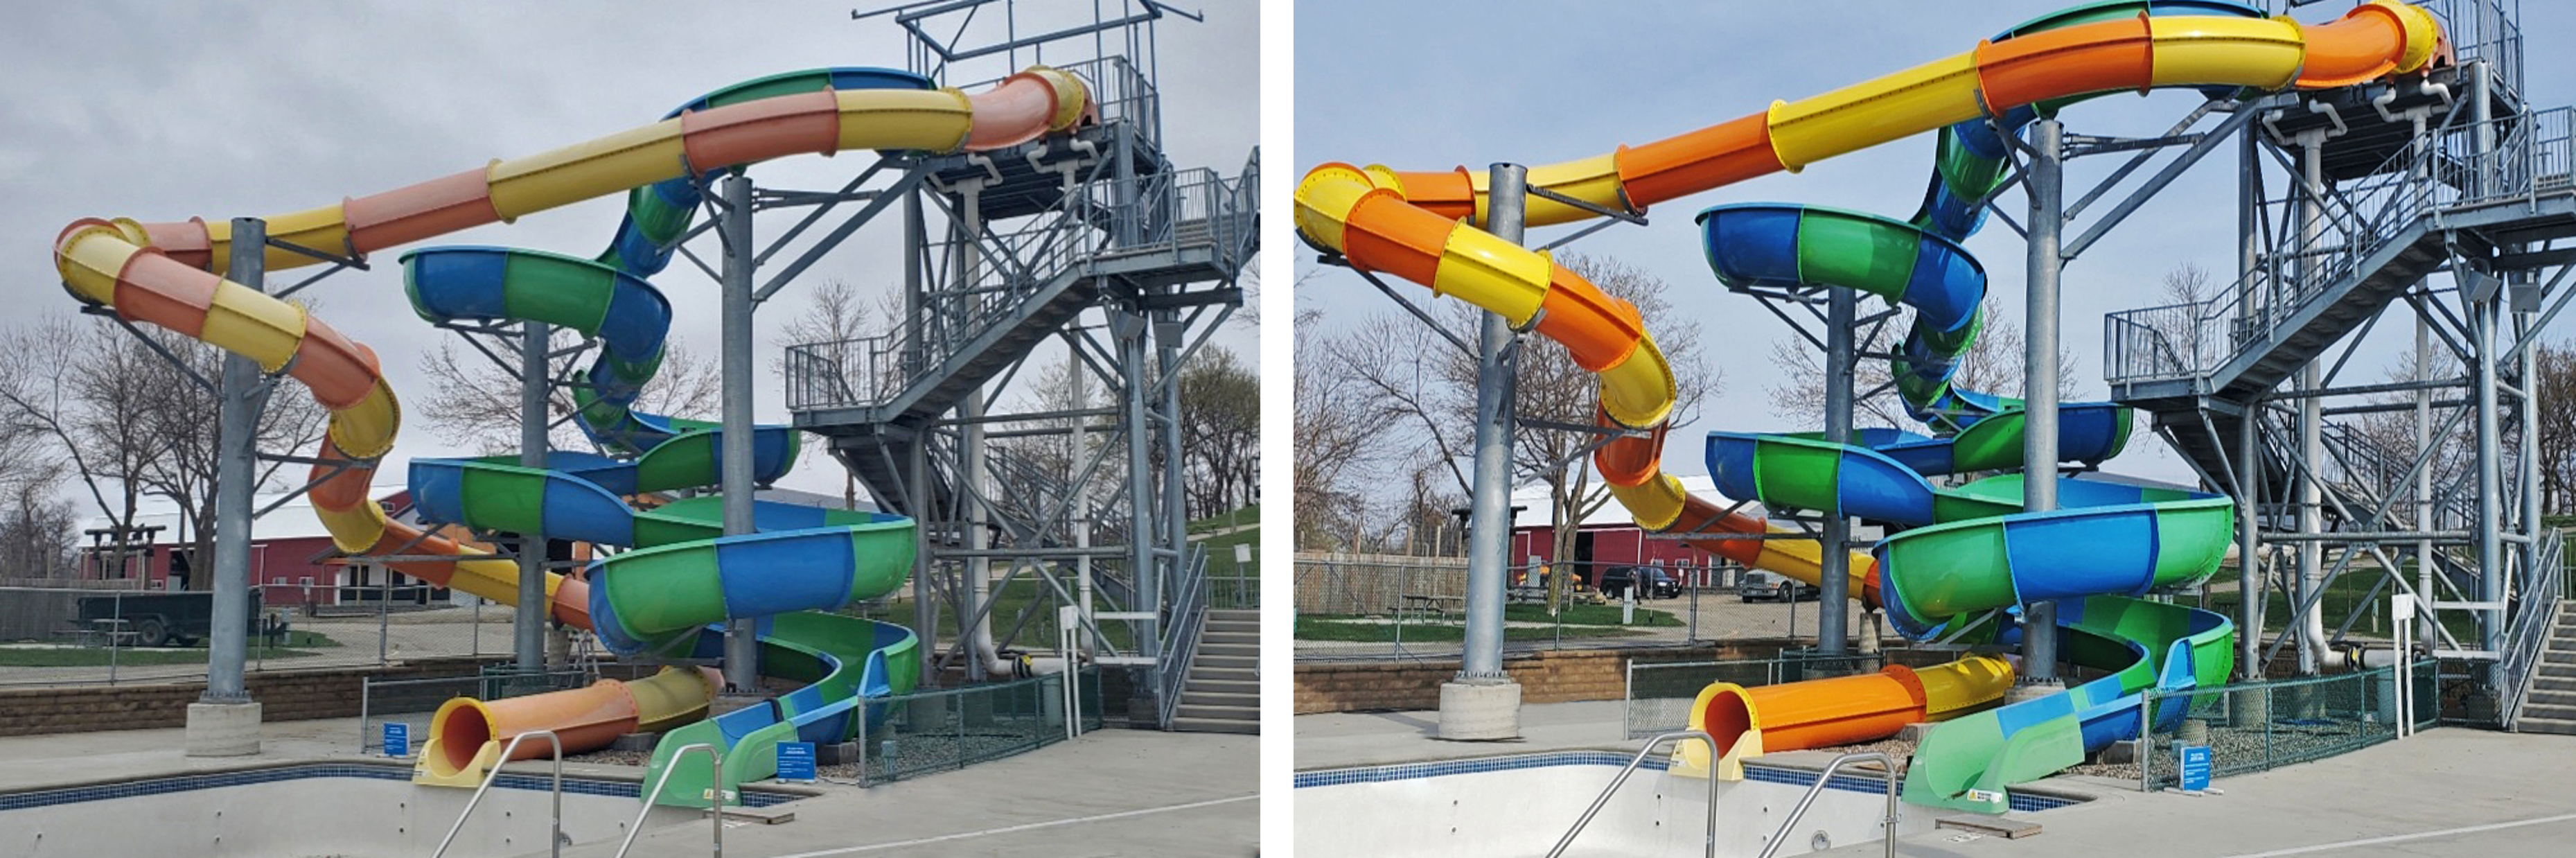 One yellow and orange water slide, one blue and green water slide, before and after refurbishment